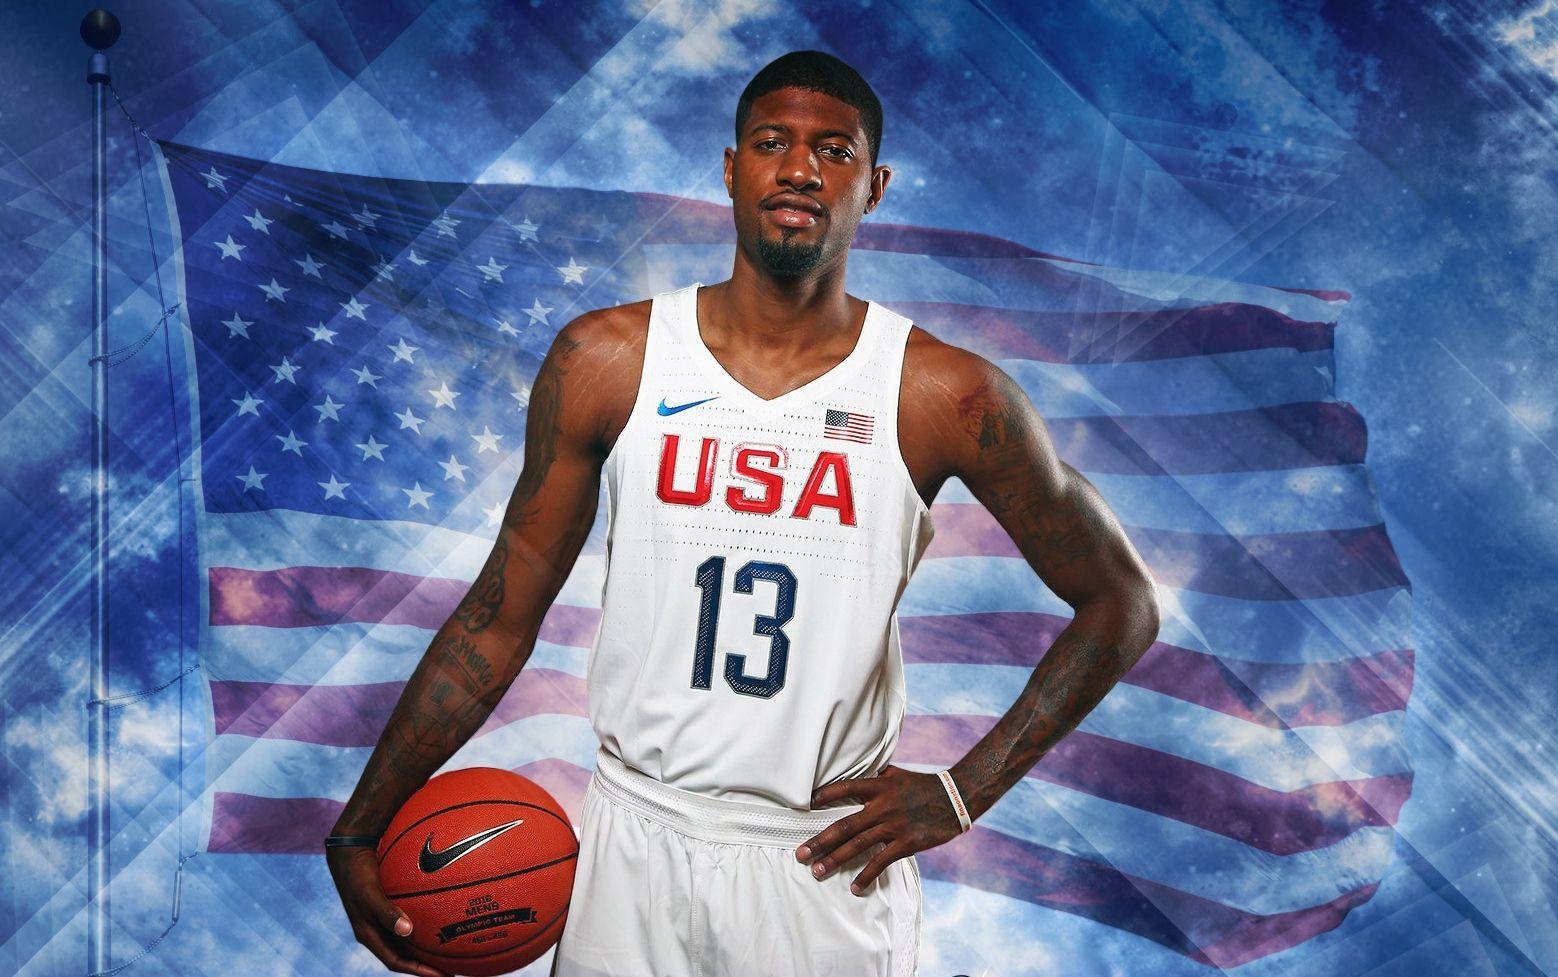 Paul George wins Gold with Team USA in Rio